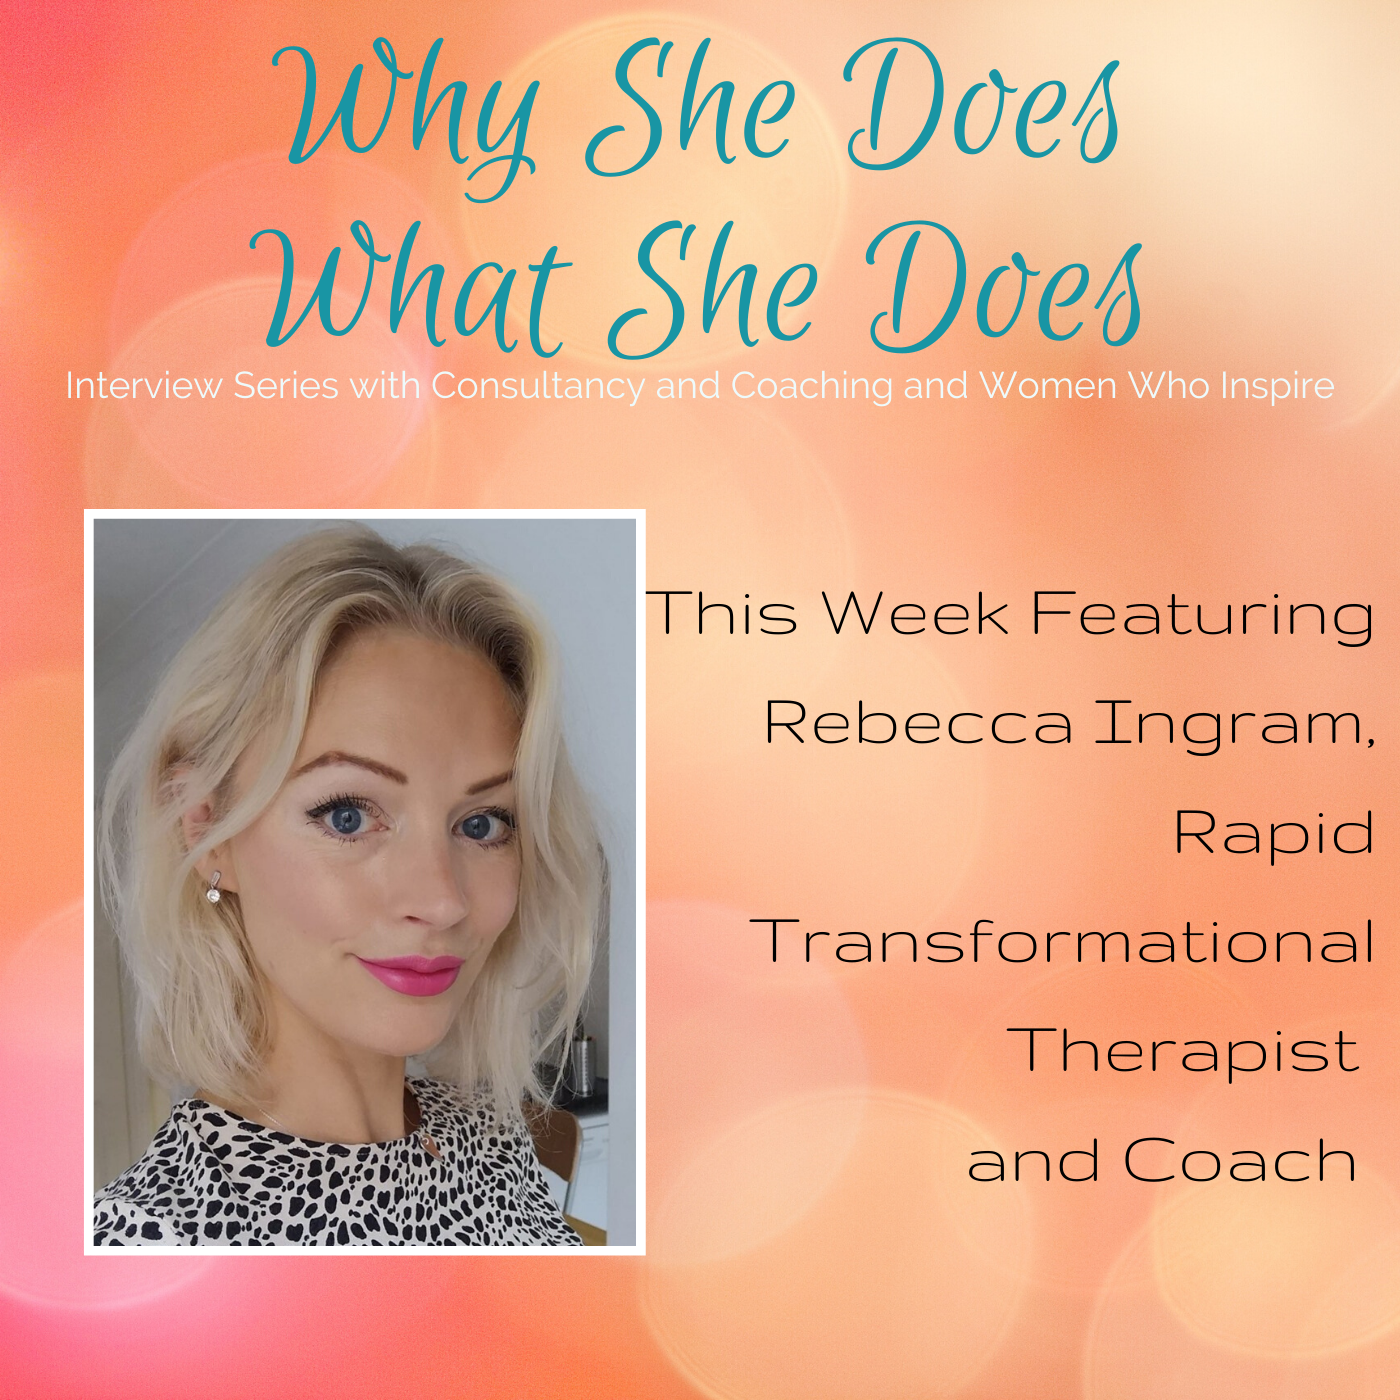 Rebecca Ingram Why She Does What She Does, Interview with Carol Evans, Consultancy and Coaching-3